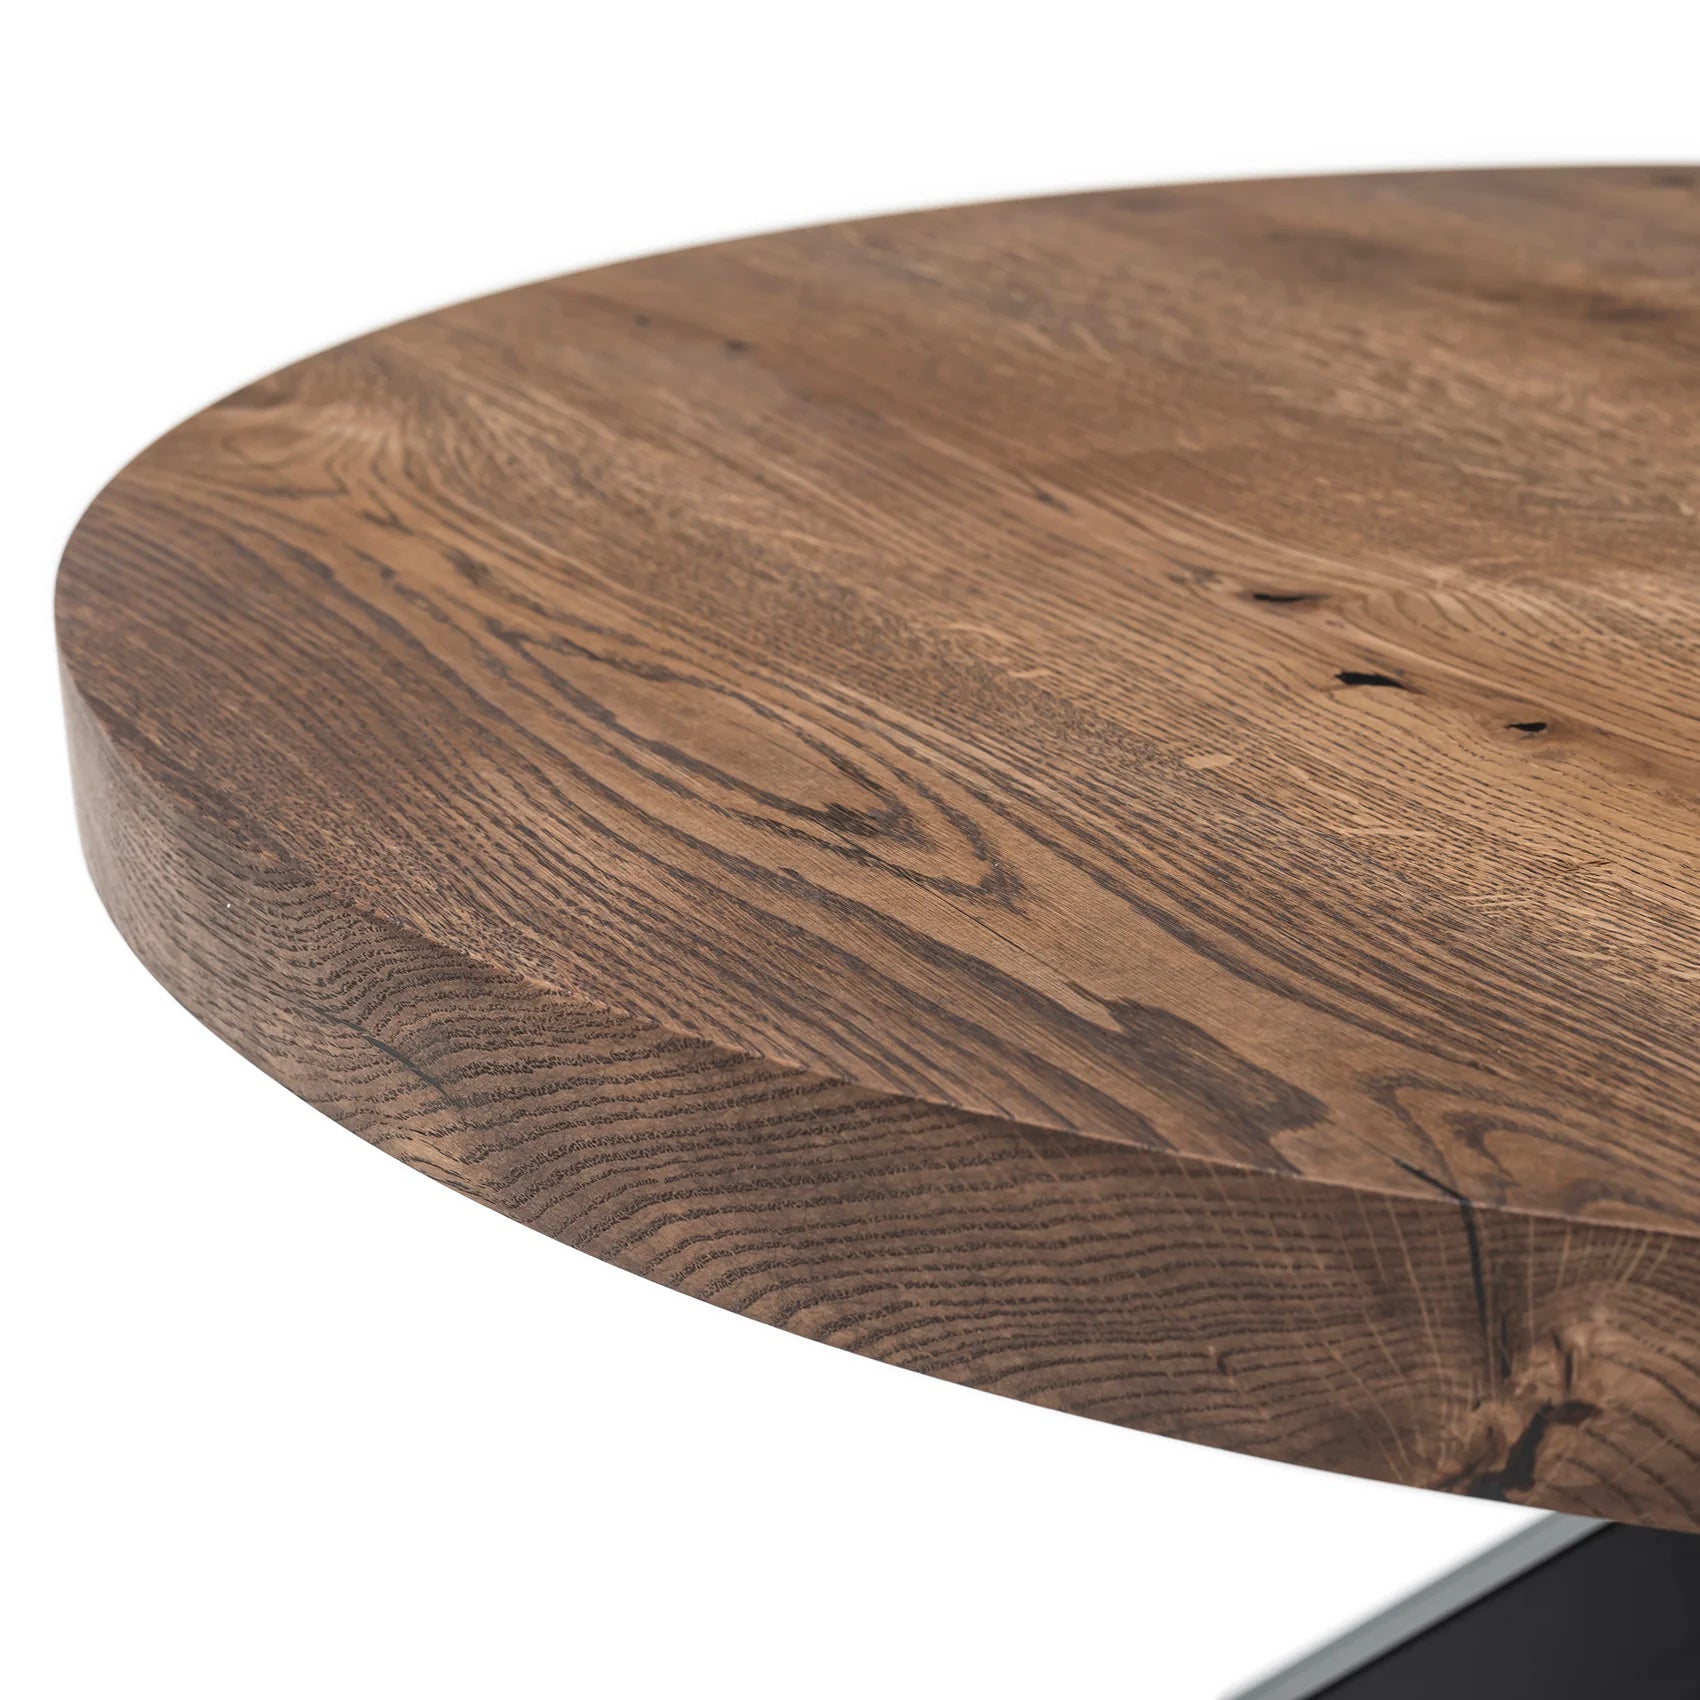 Round Oak Coffee Table, Chocolate - S10Home